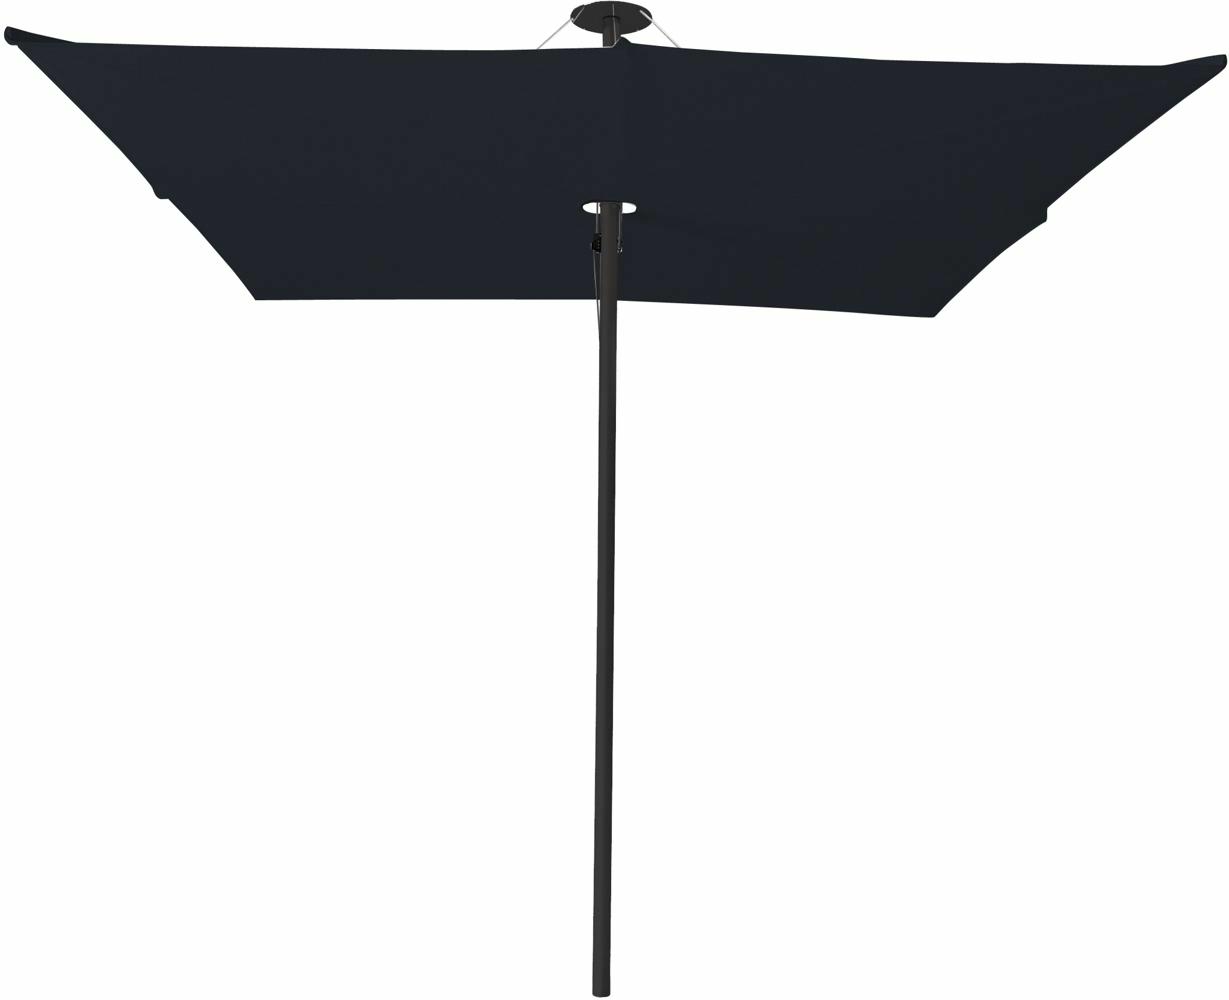 Infina center post umbrella, 3 m square, with frame in Dusk and Colorum Black canopy.